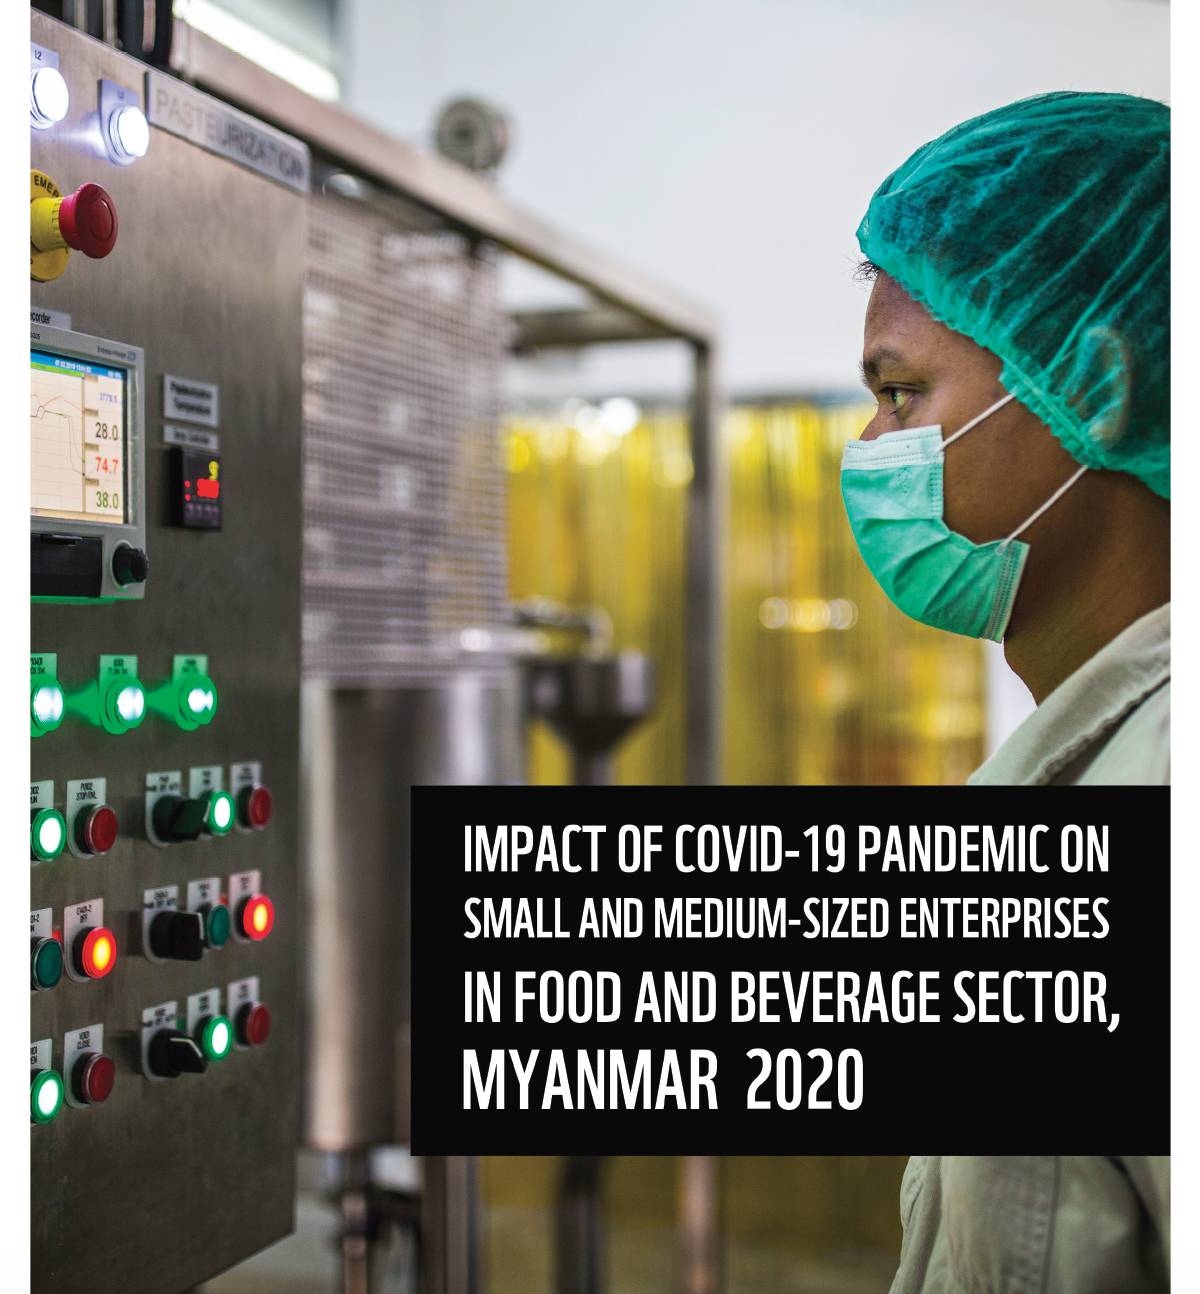 Impact of COVID-19 Pandemic on SMEs in Food and Beverage Sector, Myanmar 2020